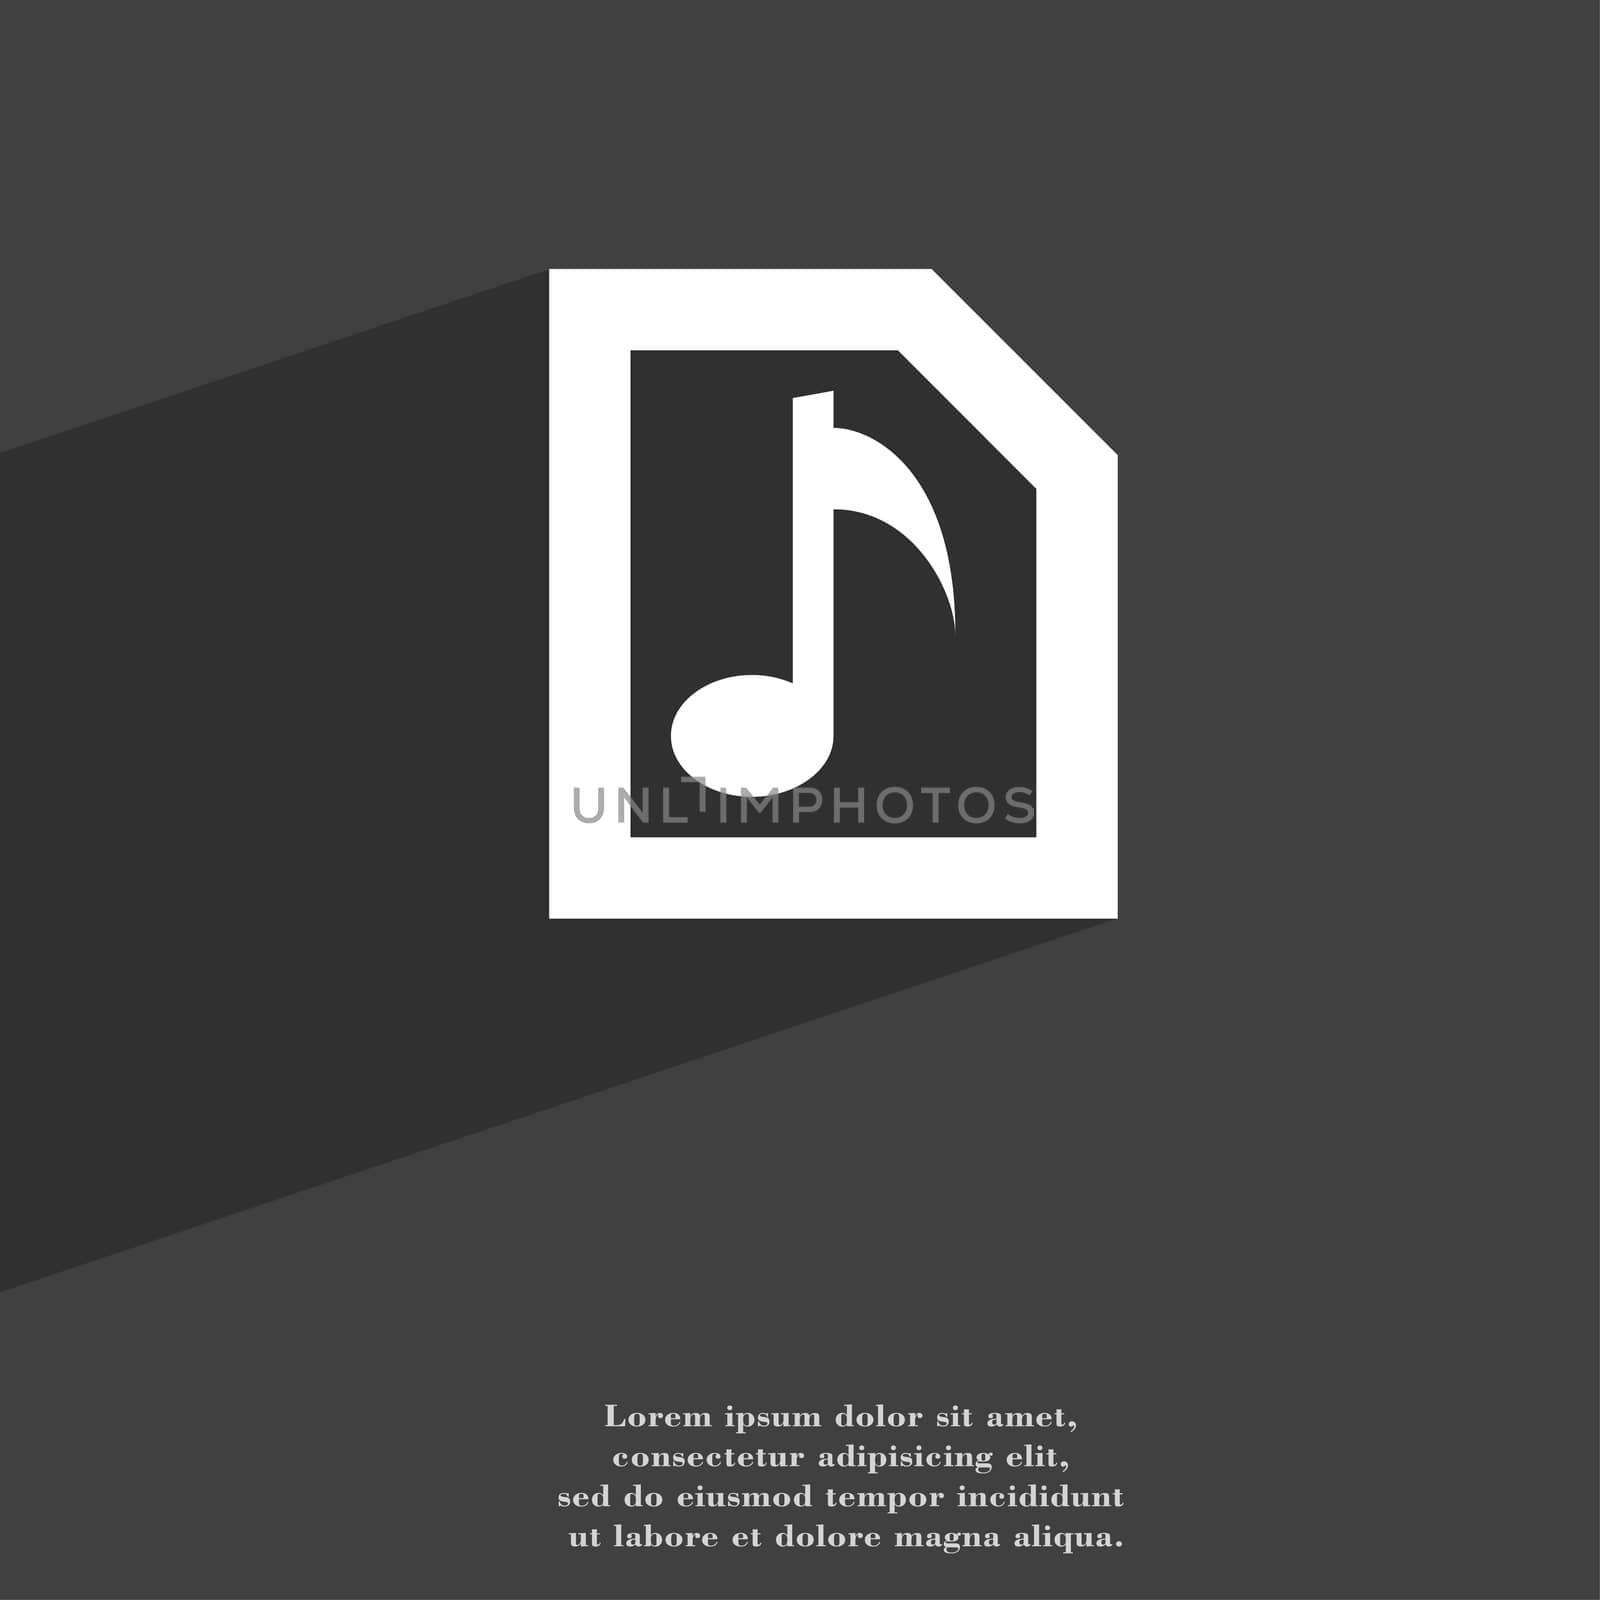 Audio, MP3 file icon symbol Flat modern web design with long shadow and space for your text. illustration